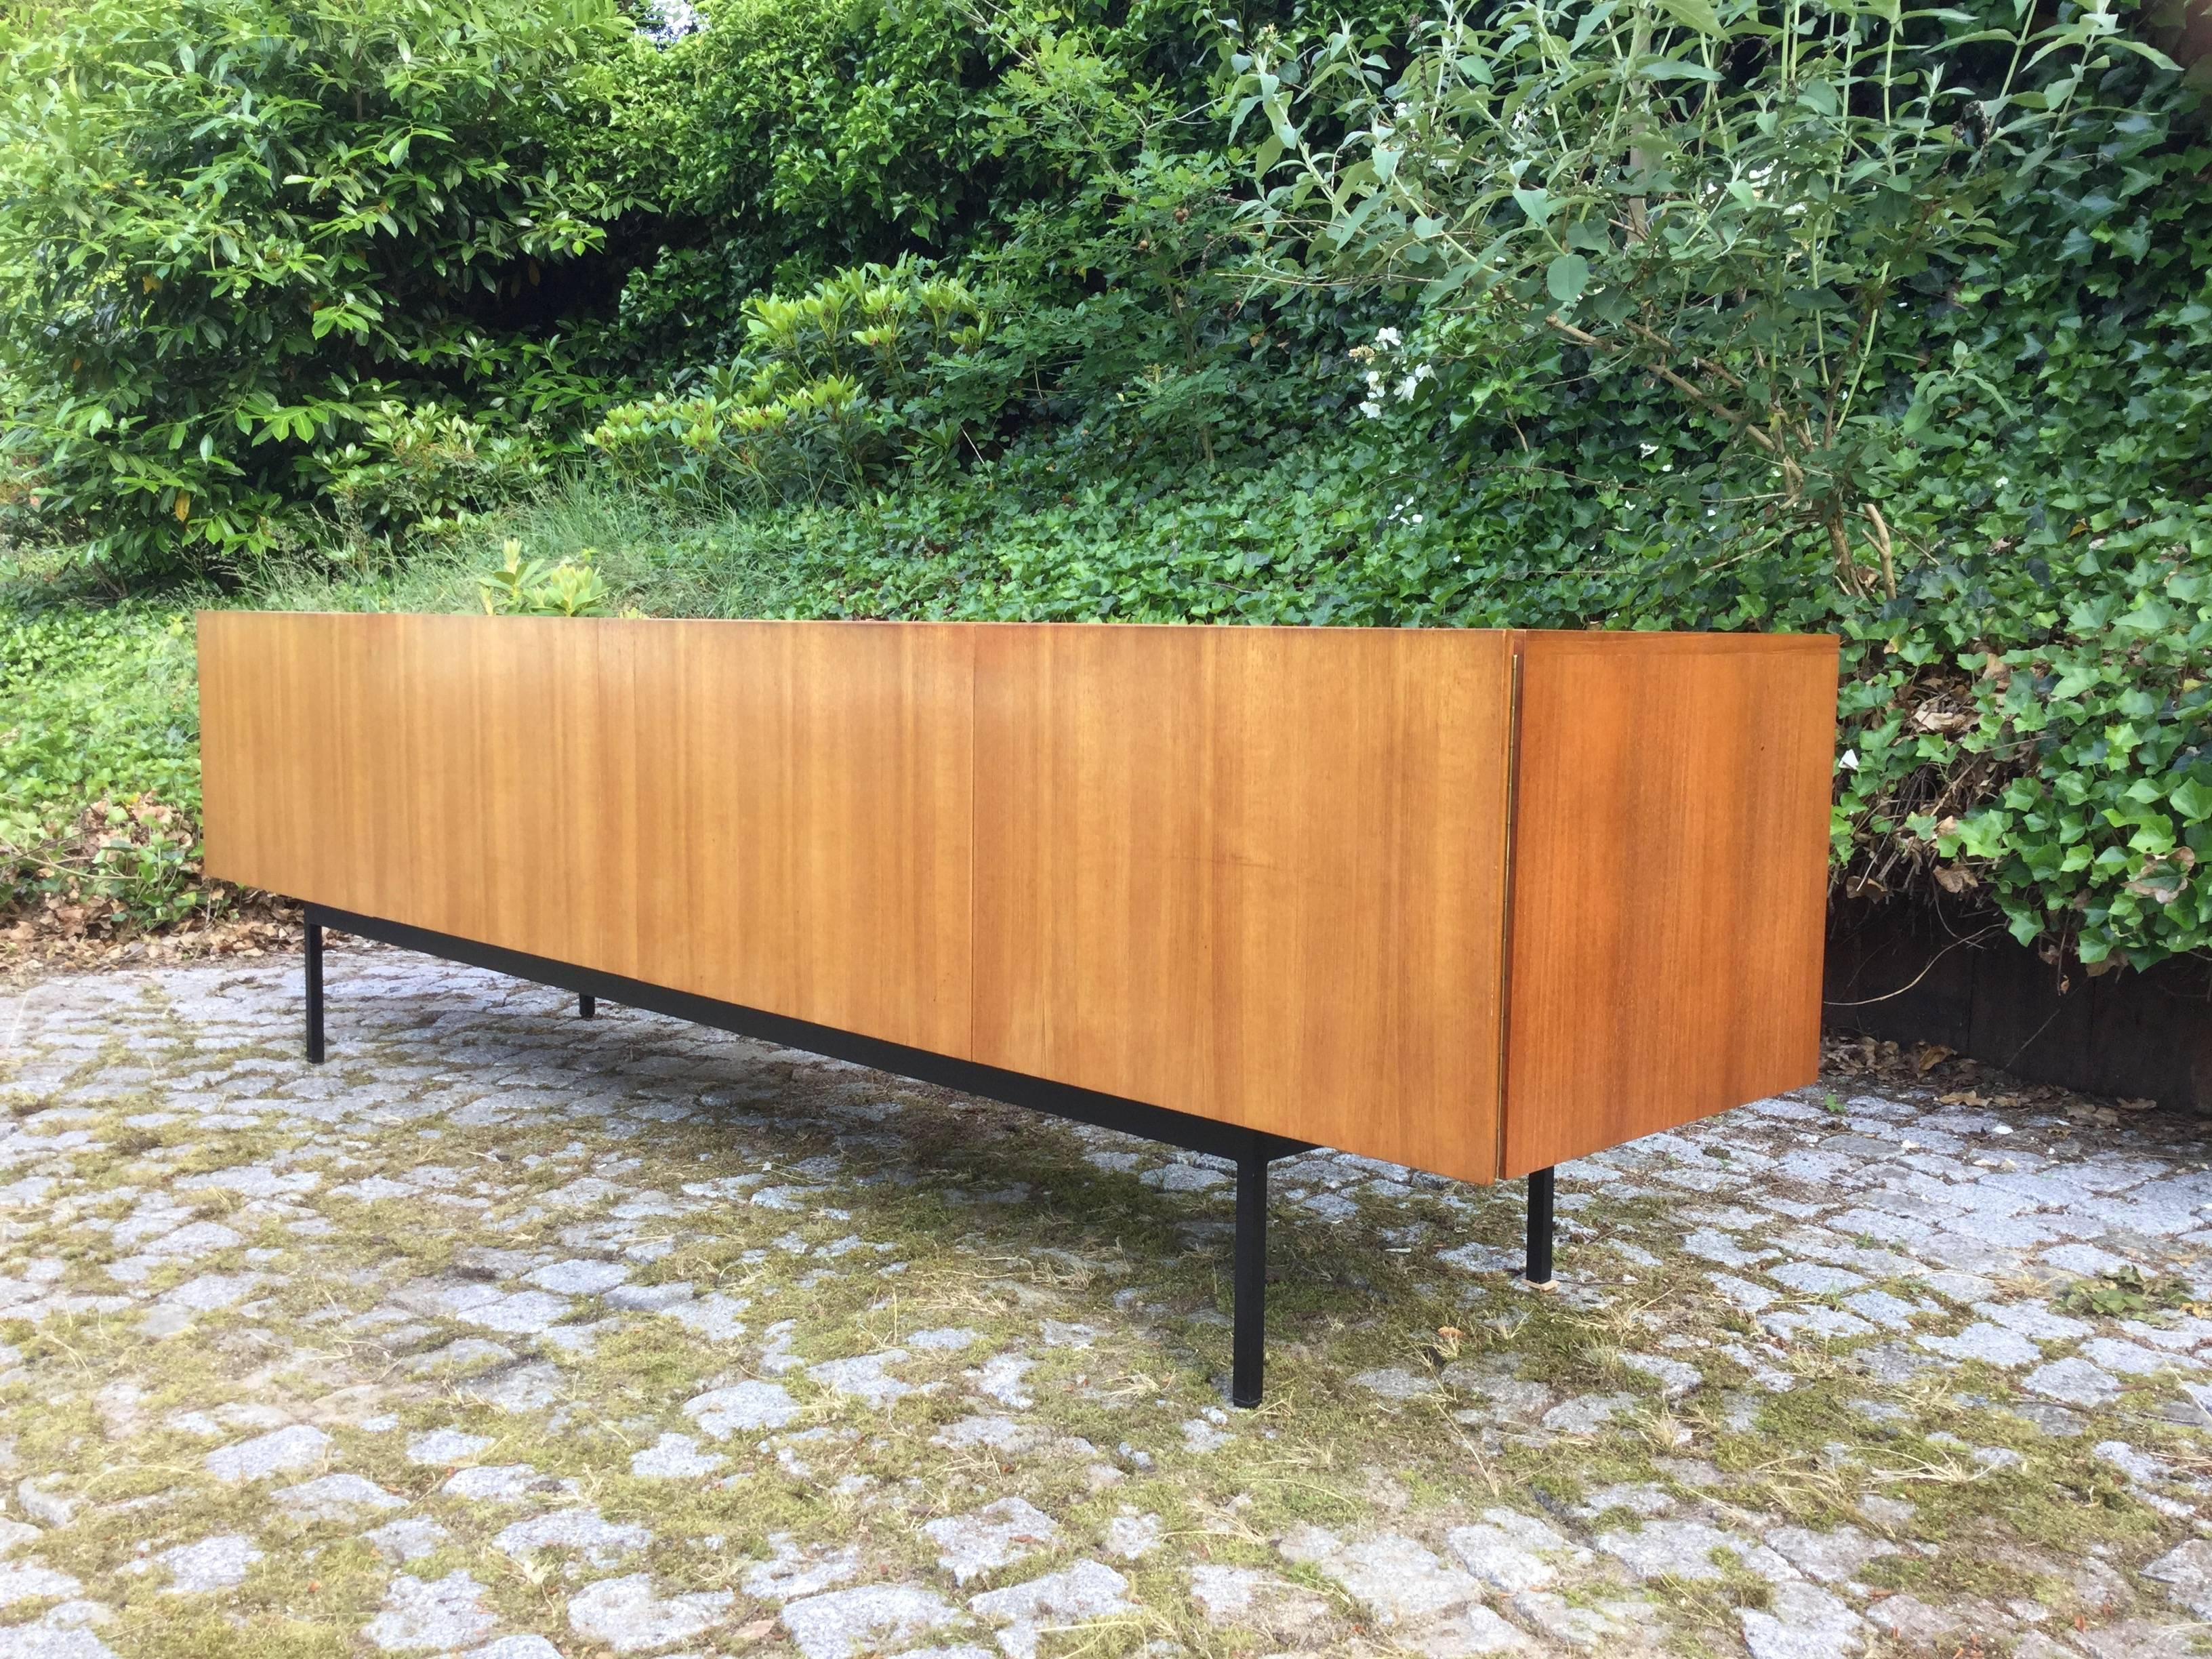 Exceptional teak sideboard model B40 by German designer Dieter Wäckerlin, designed in 1958 for German manufacturer Behr who is knows for their exceptional high end quality manufacturing.
The refined minimalistic teak structure comes with an